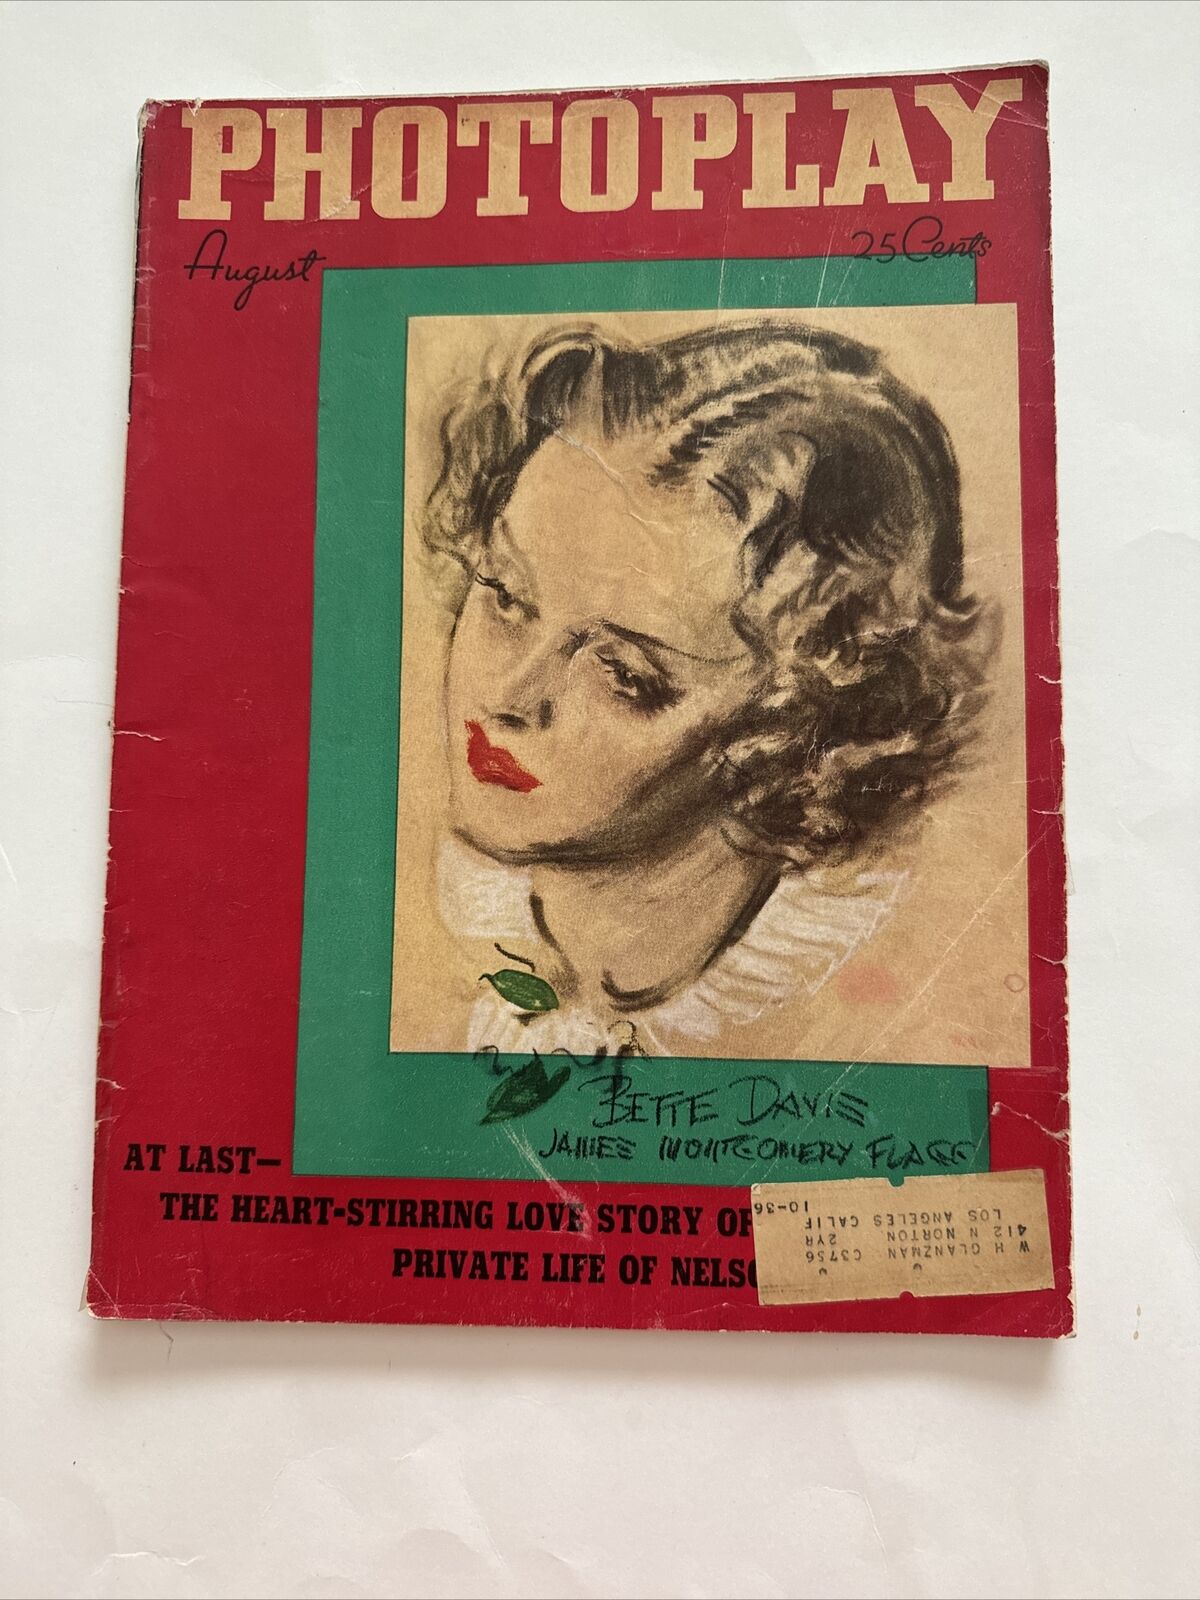 PHOTOPLAY August 1936 Fan Magazine BETTE DAVIS Cover by JAMES MONTGOMERY FLAGG